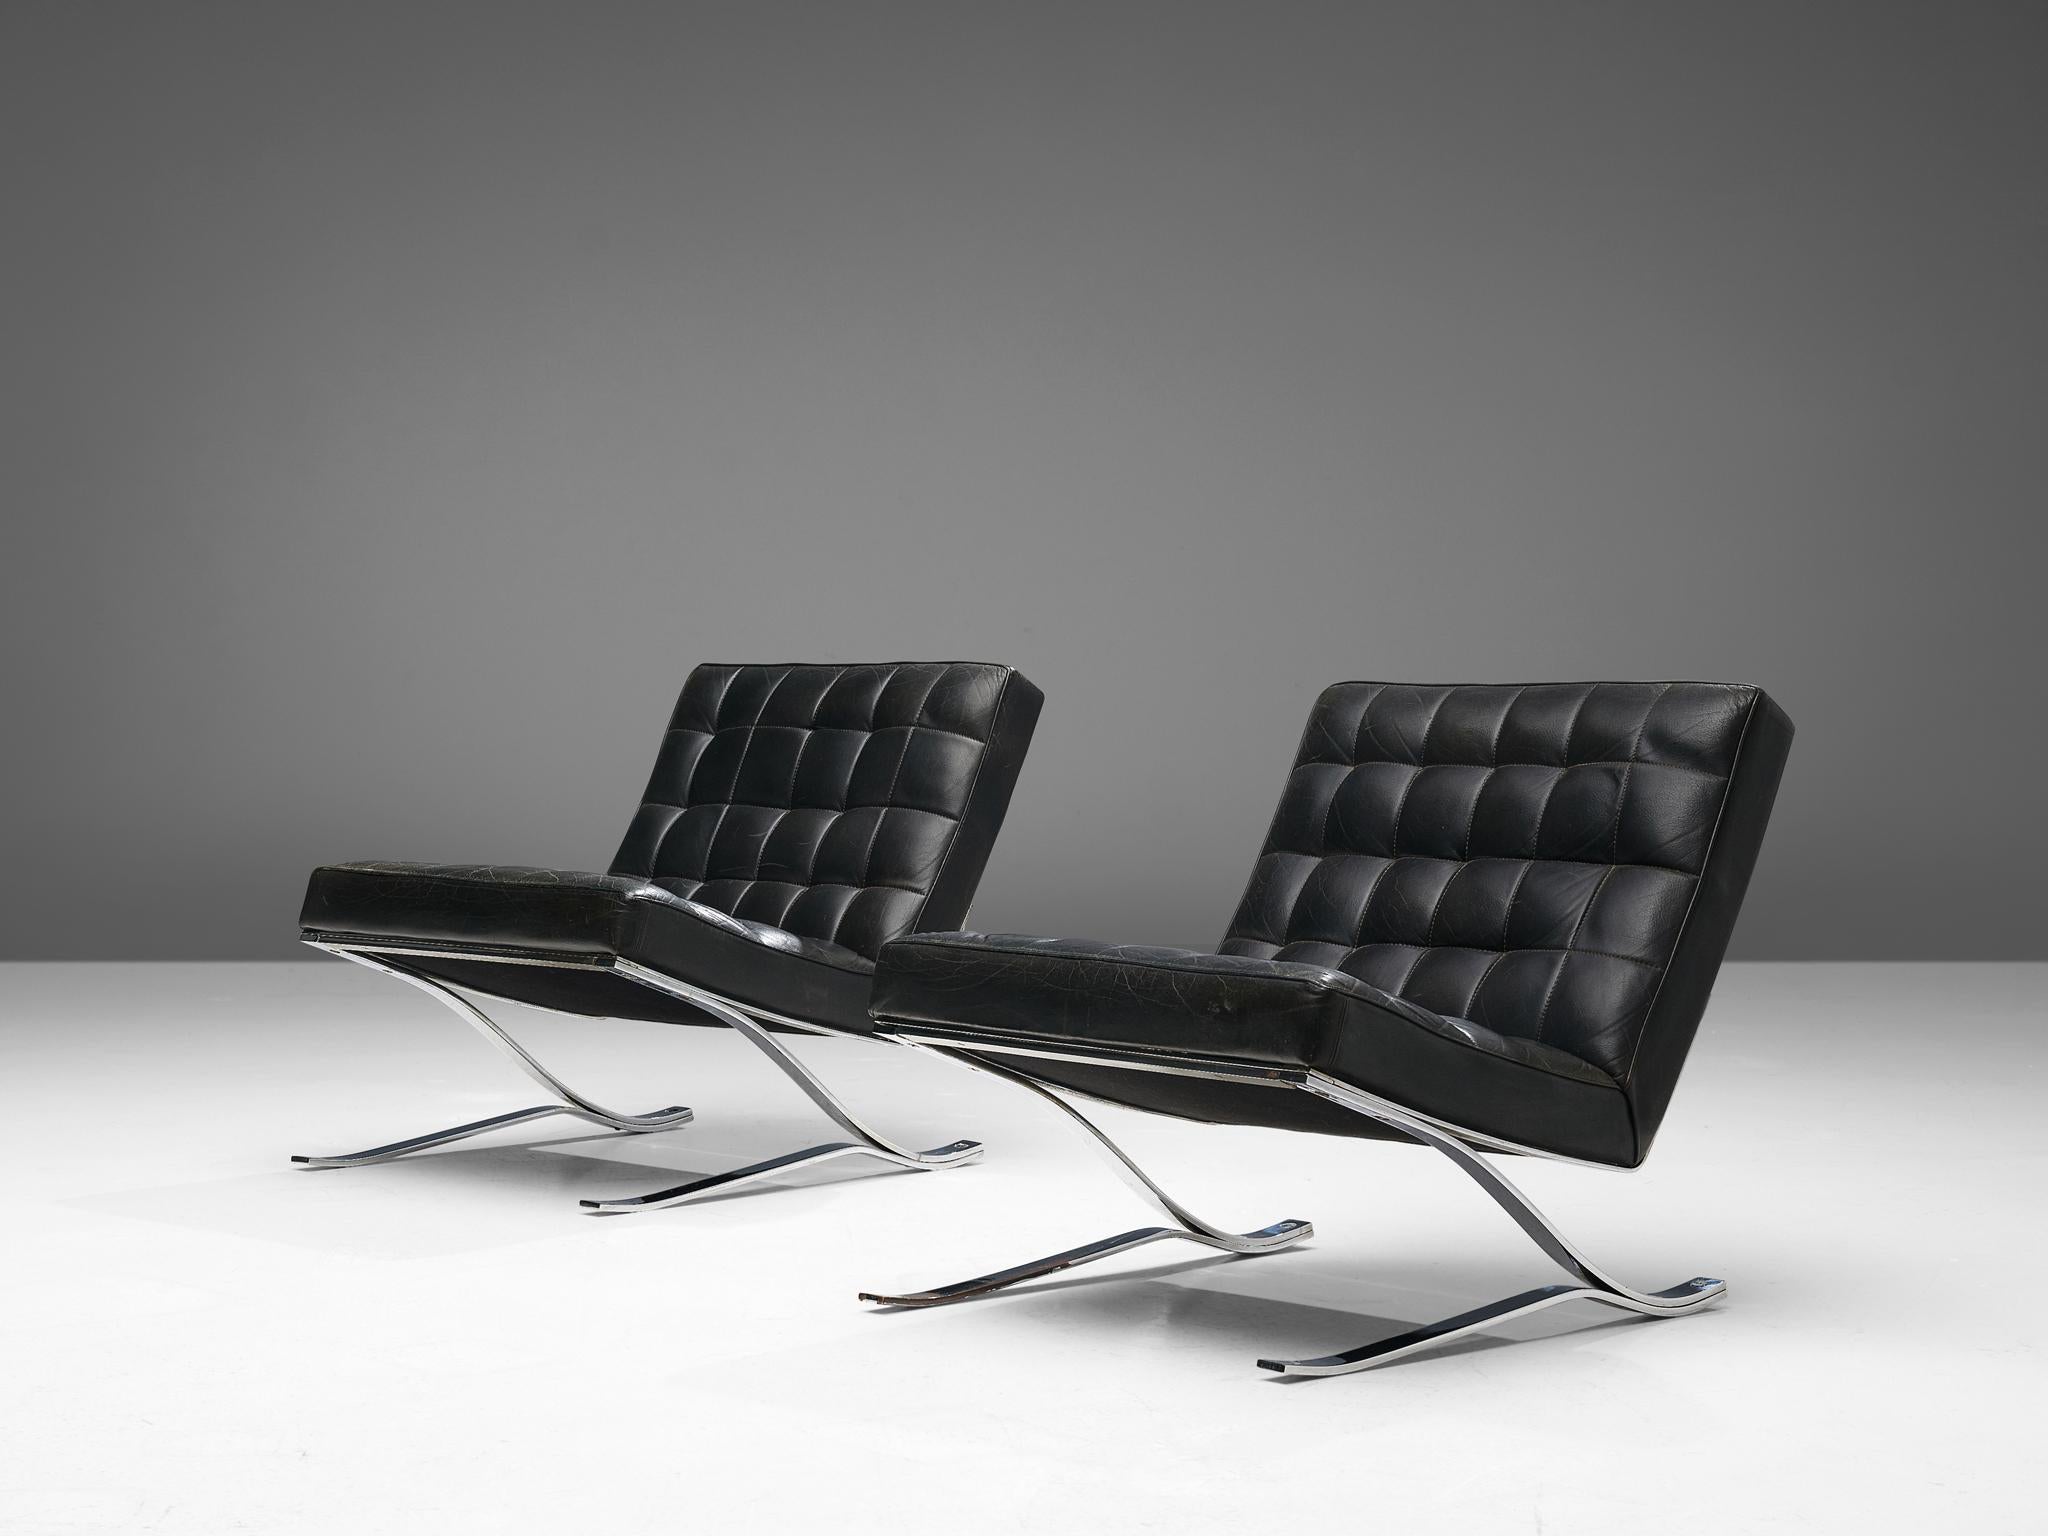 Rudolf Horn for Rölf Potsdam, cantilever lounge chairs, leather, chrome plated steel, Germany, design 1964 and manufactured in 1966

DDR-designer Rudolf Horn strongly admired the iconic ‘Barcelona chair’ designed by the renowned architect Ludwig